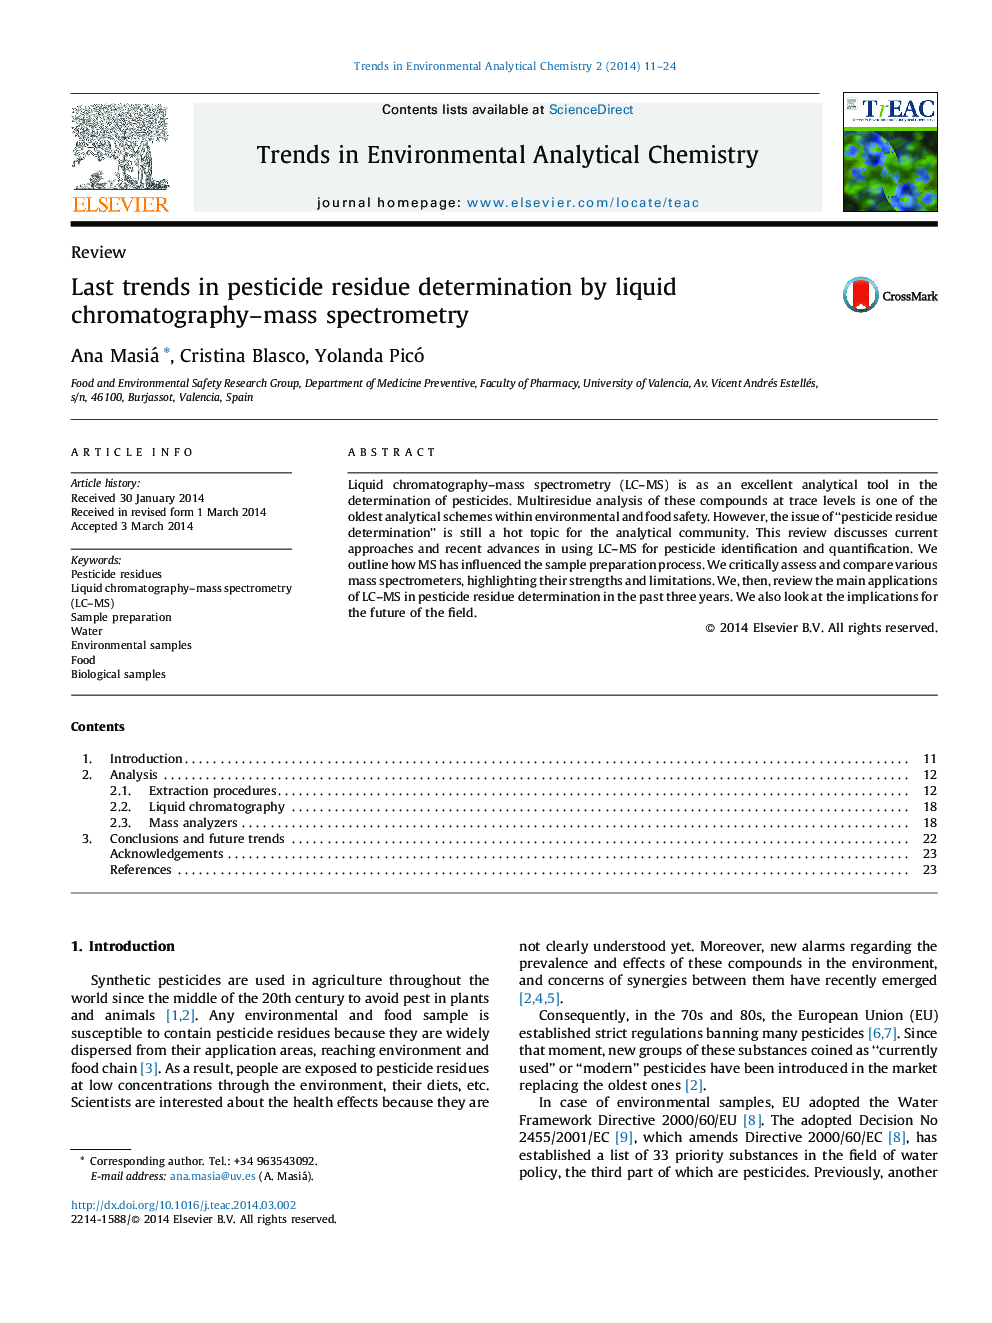 Last trends in pesticide residue determination by liquid chromatography–mass spectrometry